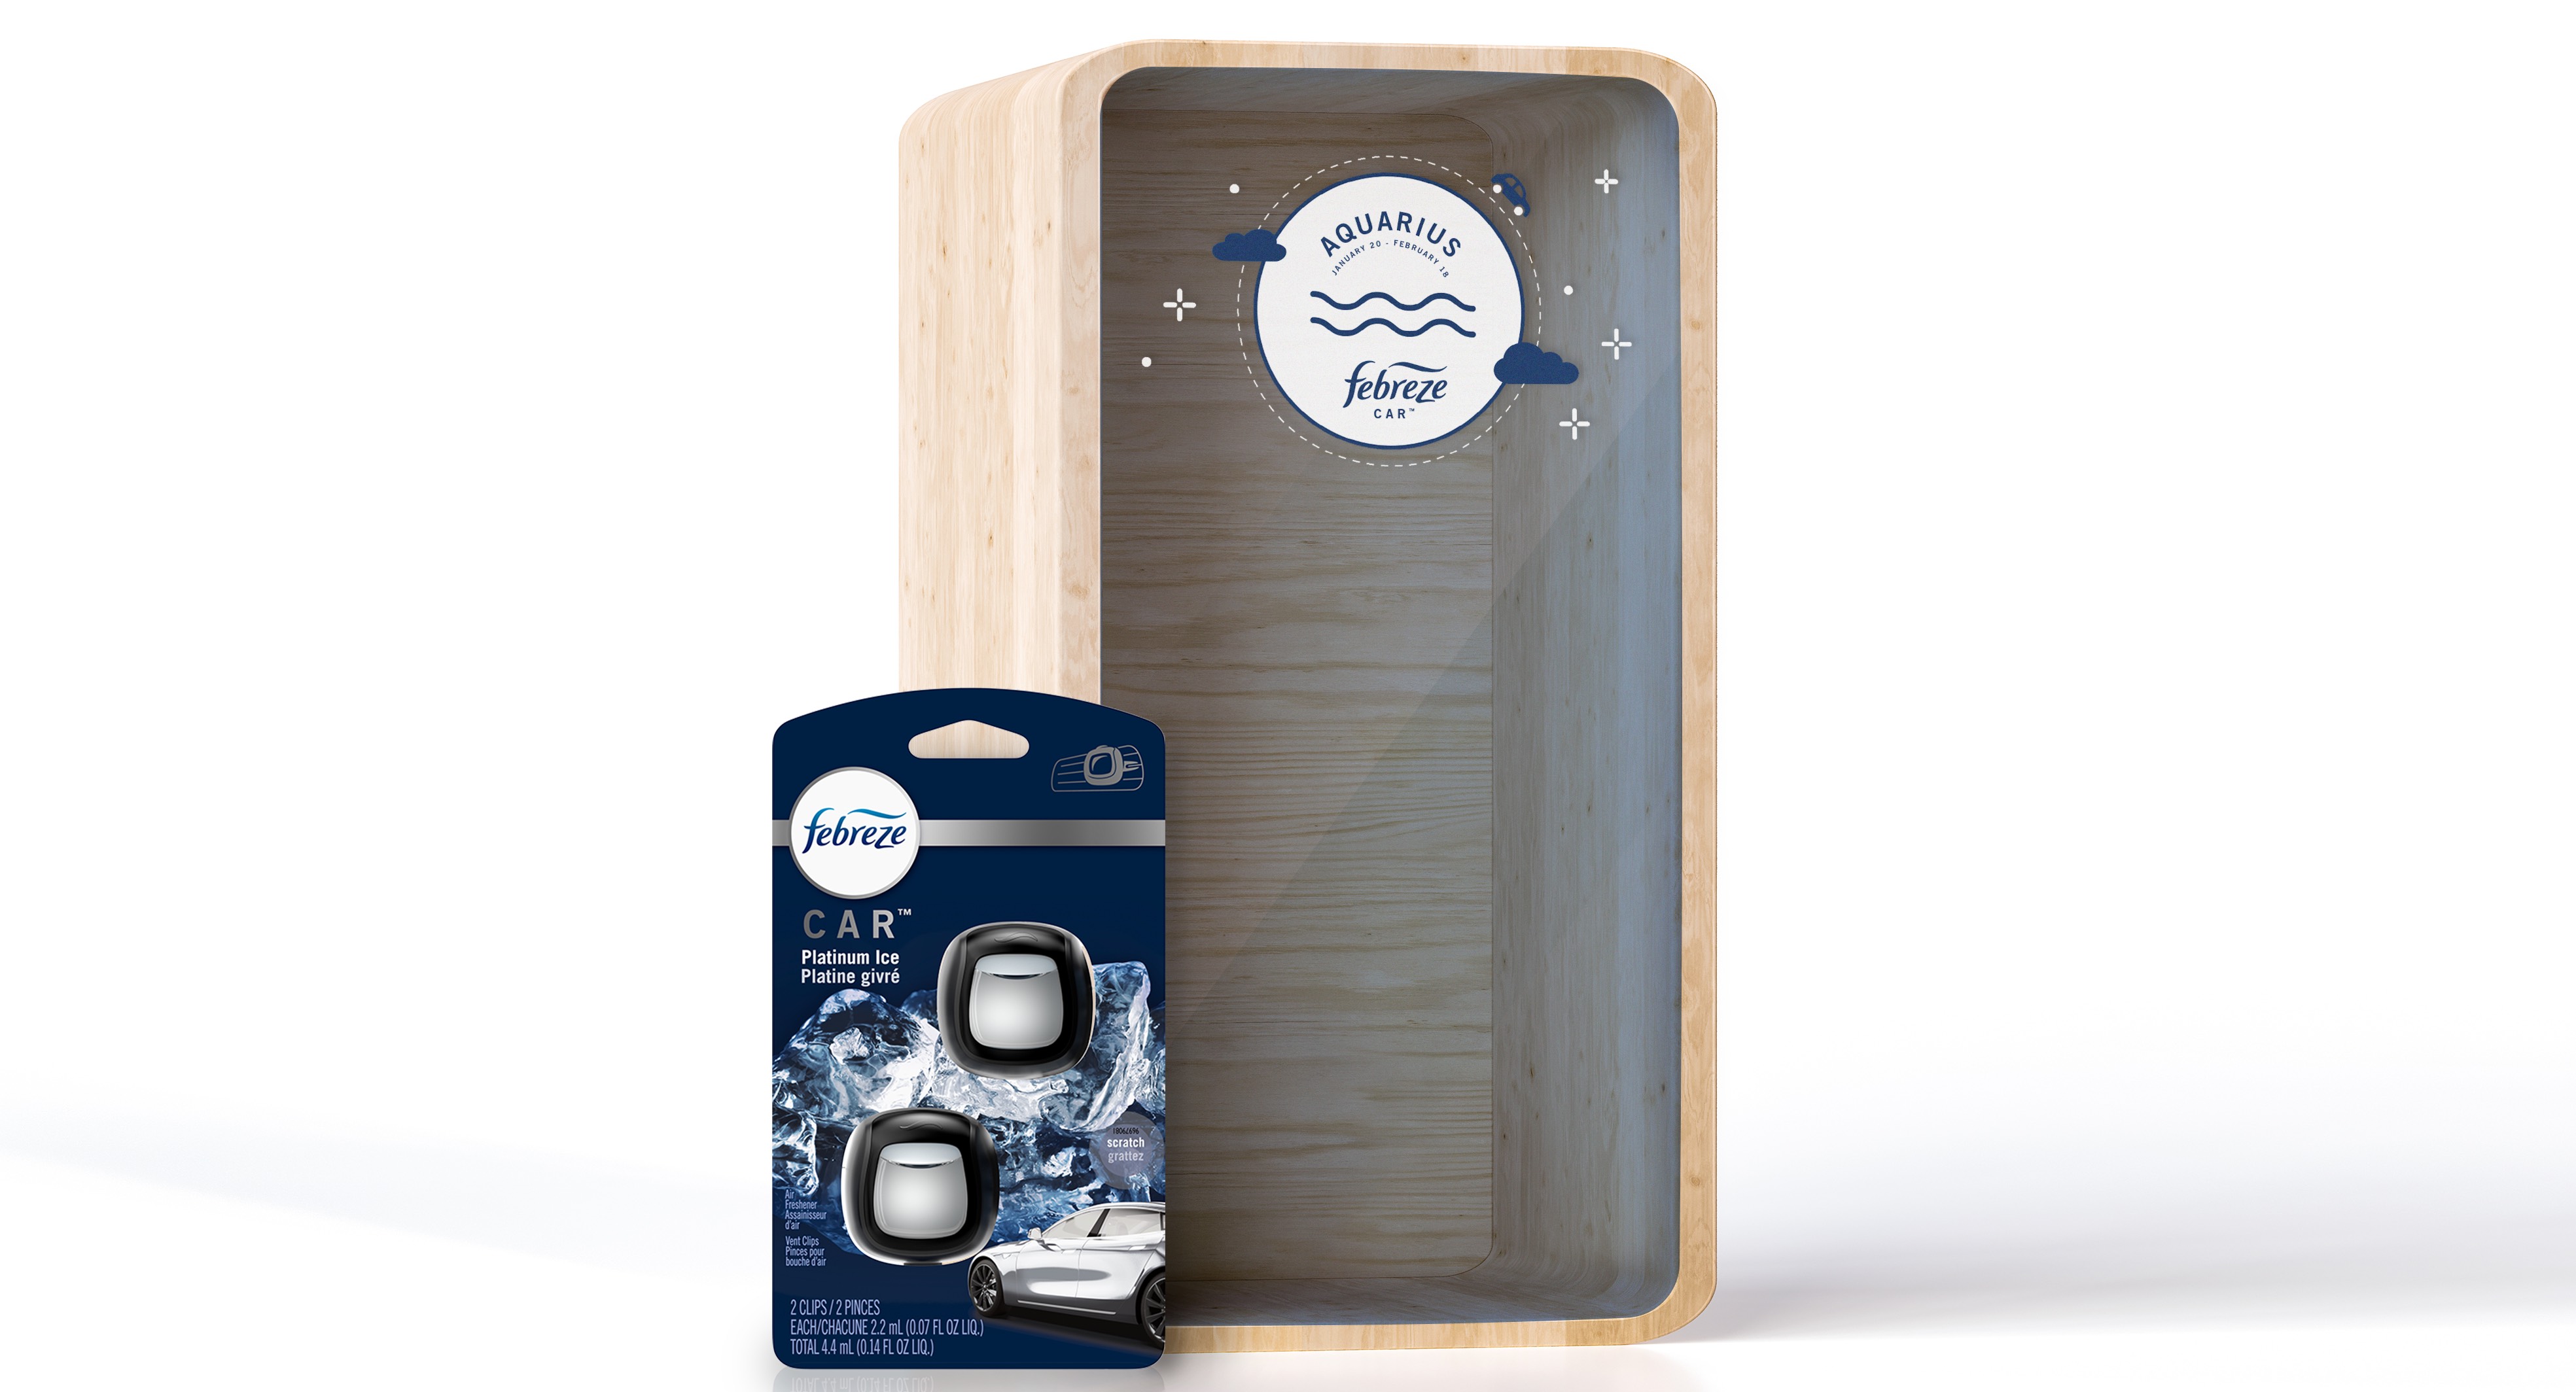 Febreze Launches Carstrology Home Fragrance Collection